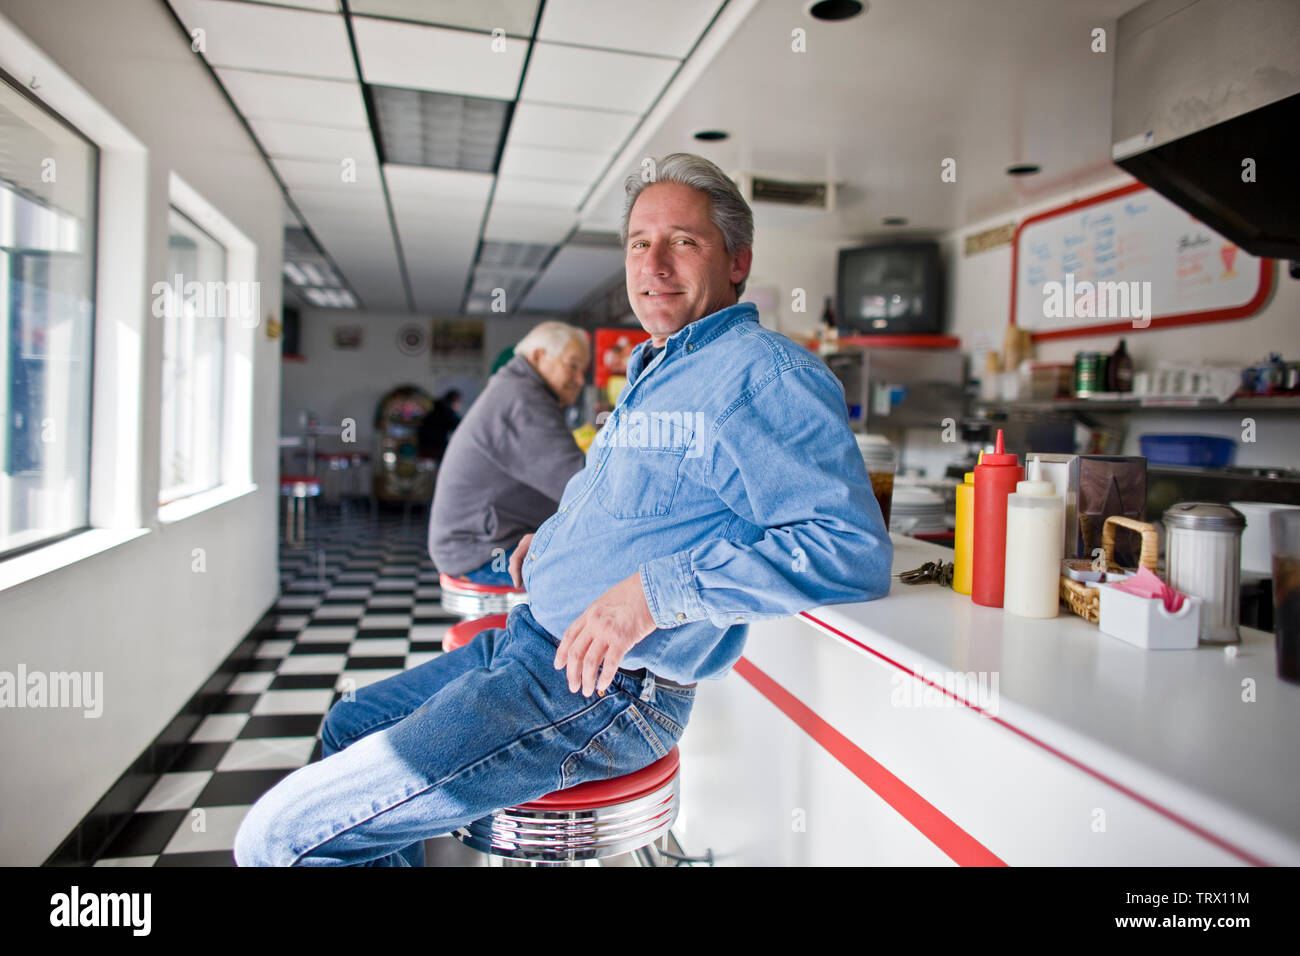 Portrait of a smiling mature man in a diner. Stock Photo